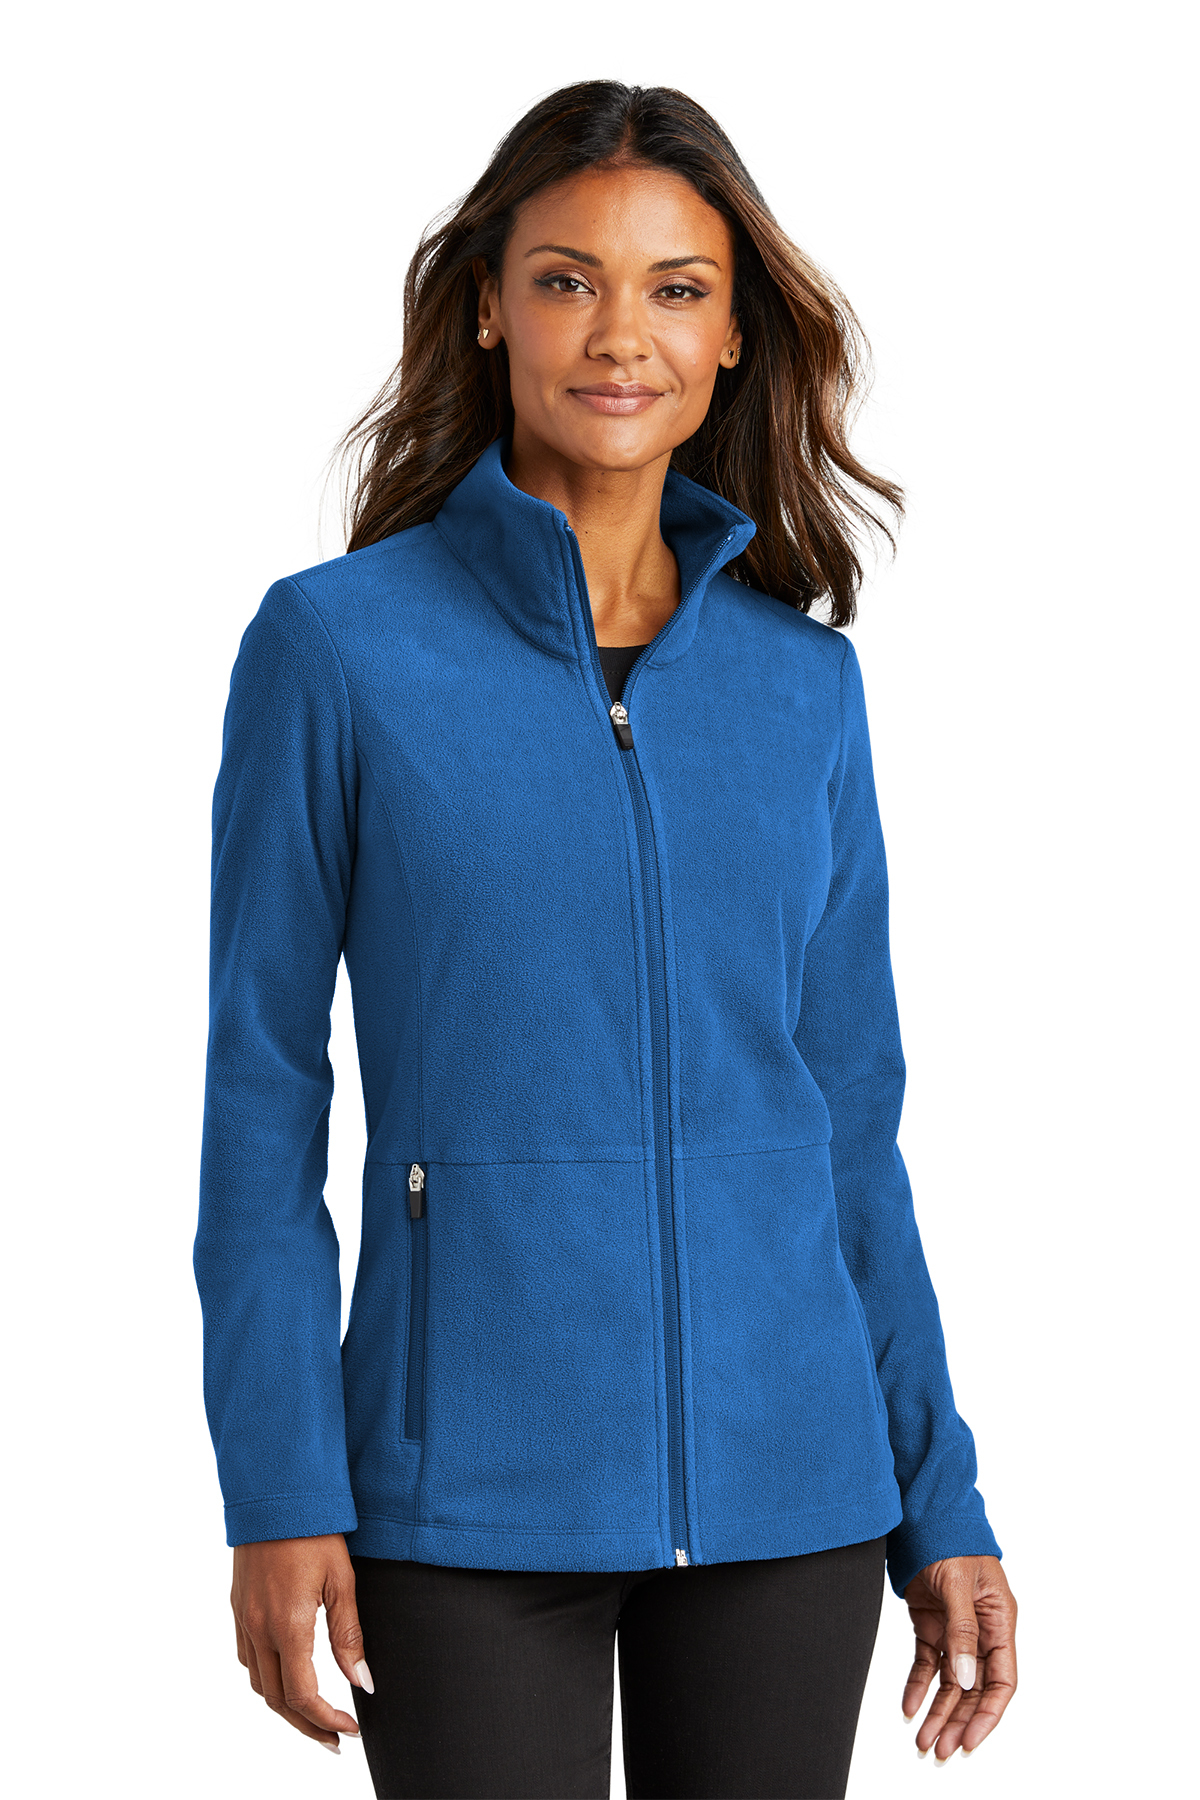 Port Authority Ladies Accord Microfleece Jacket | Product | Company Casuals